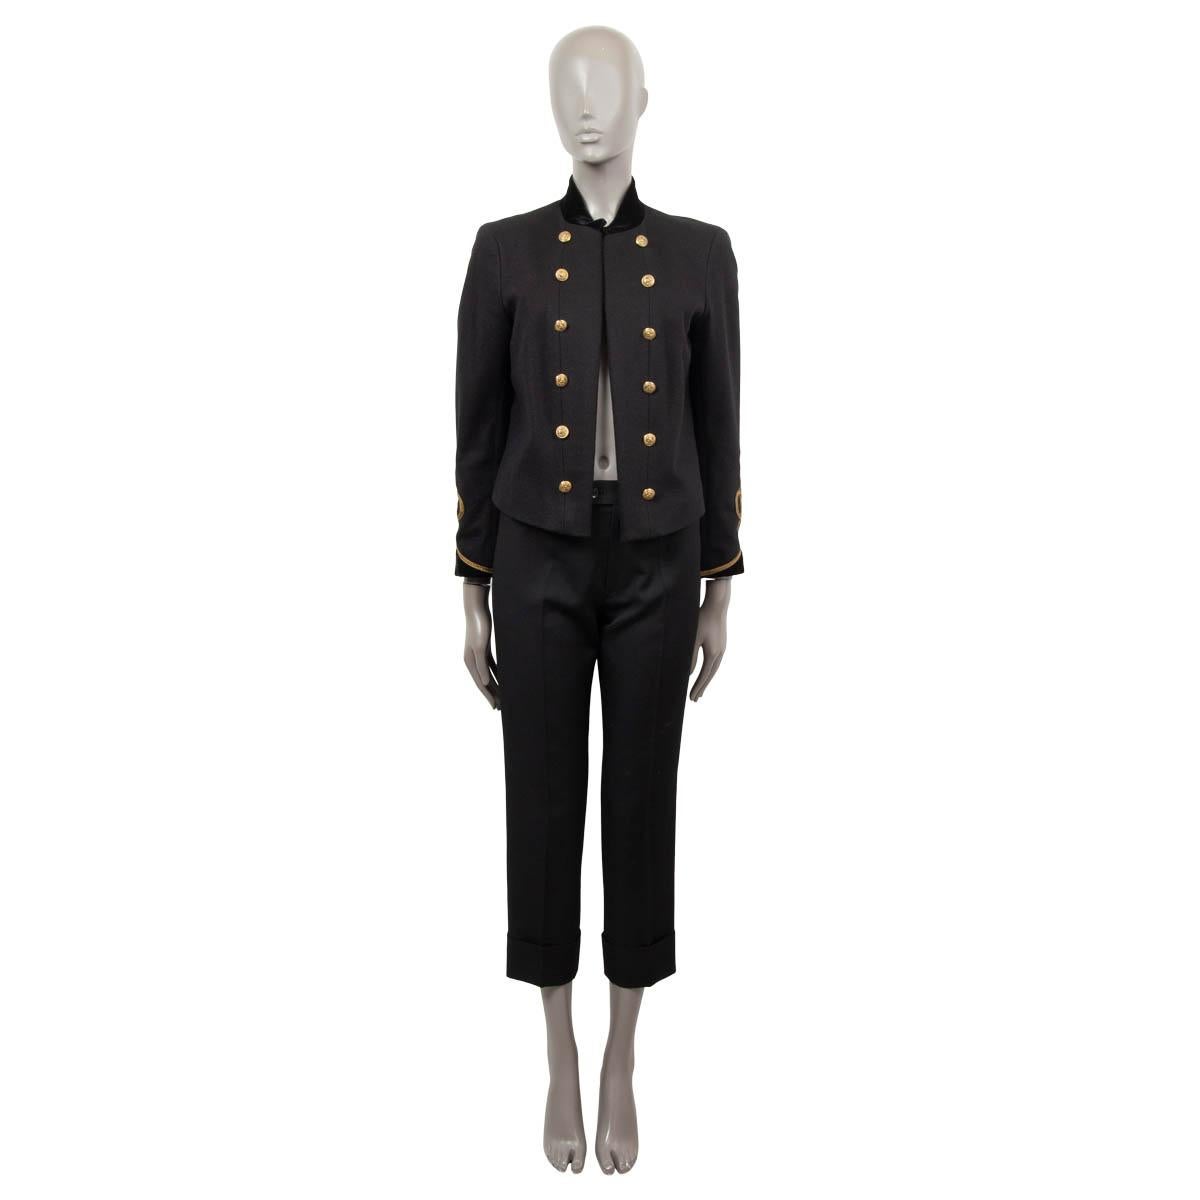 100% authentic Polo Ralph Lauren soutache trim blazer jacket is tailored from cotton (62%) and wool (38%). This surplus-inspired blazer is slightly cropped and adorned with gold-tone eagle-engraved buttons and metallic braided soutache trim in